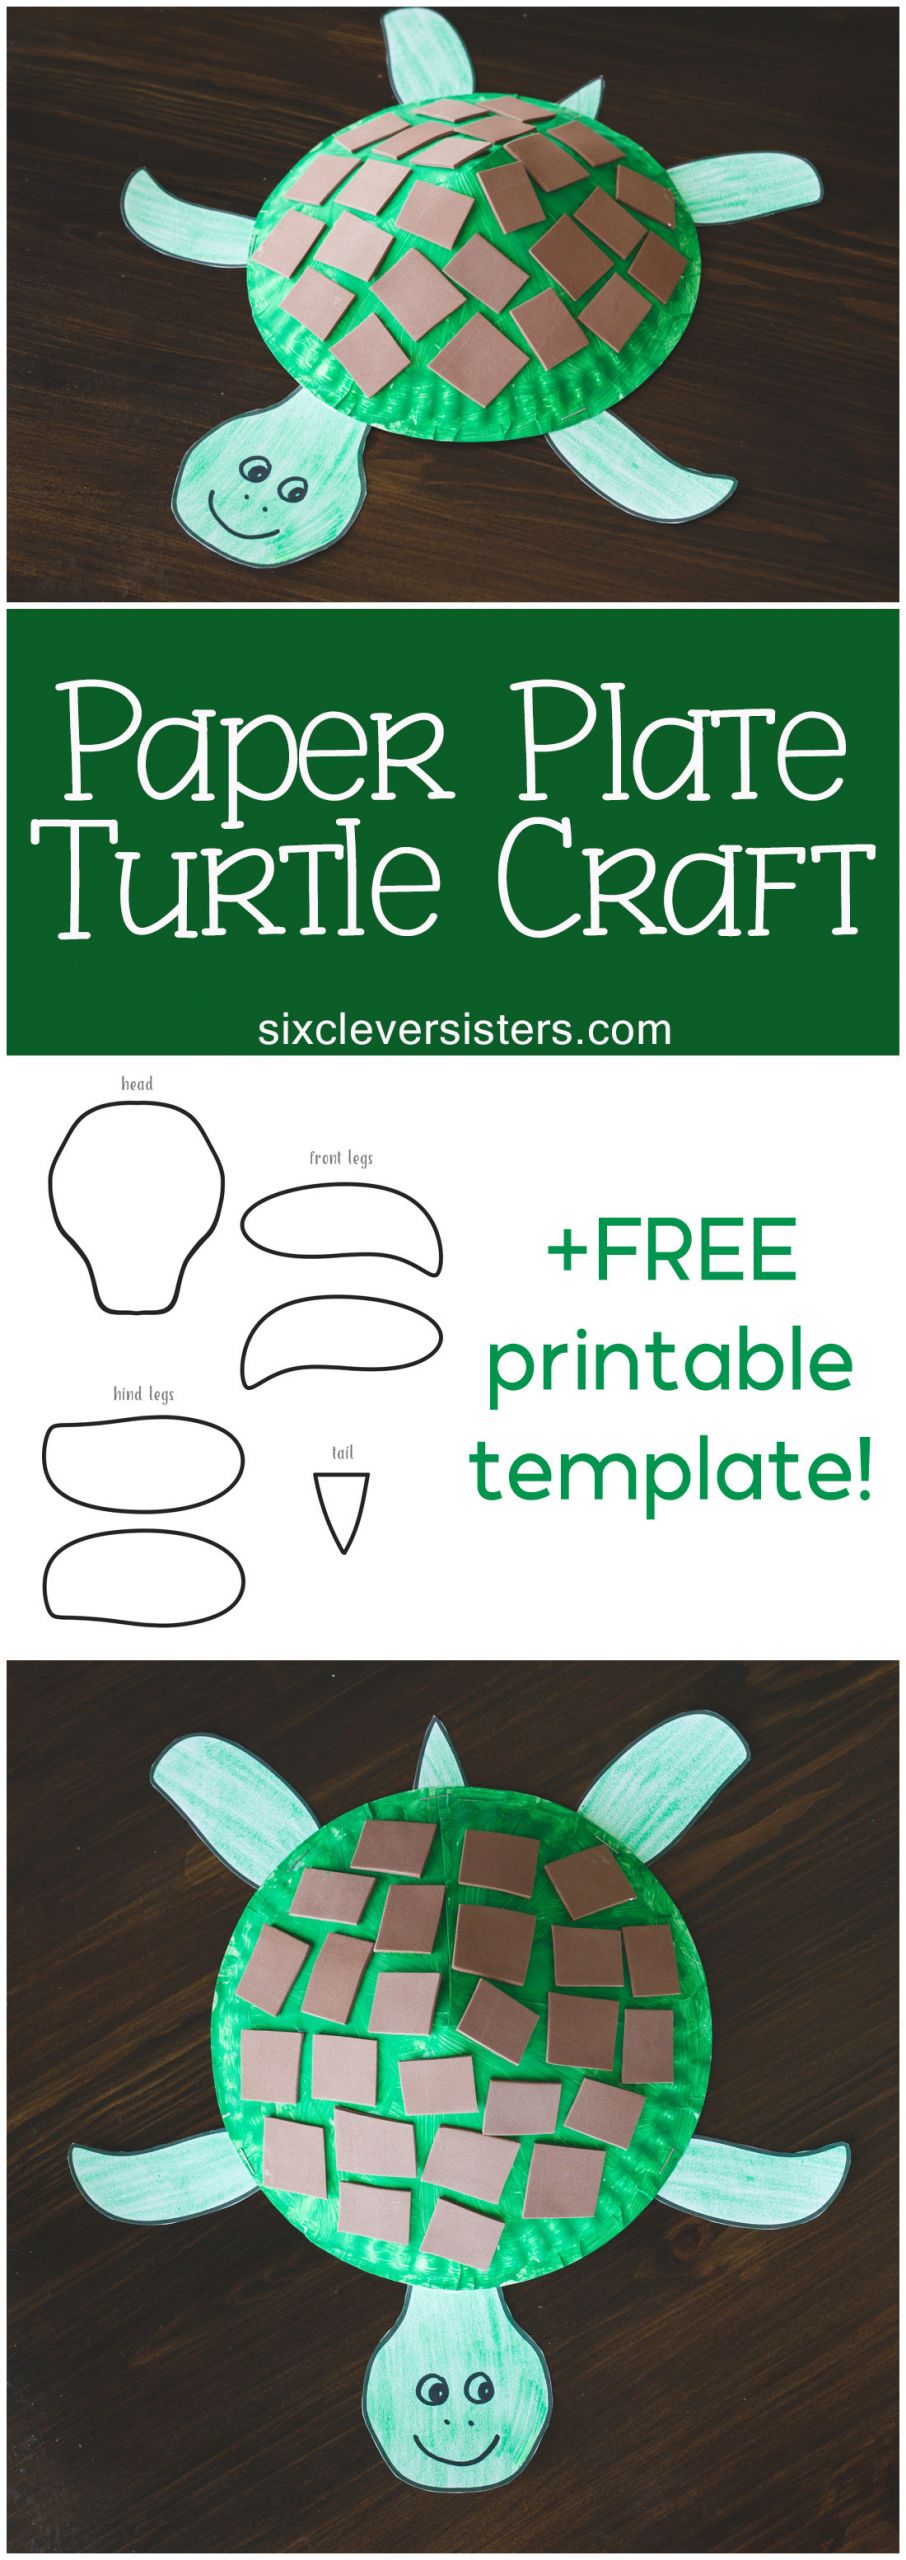 Printable Crafts For Toddlers
 Paper Plate Turtle Craft for Kids Free Printable